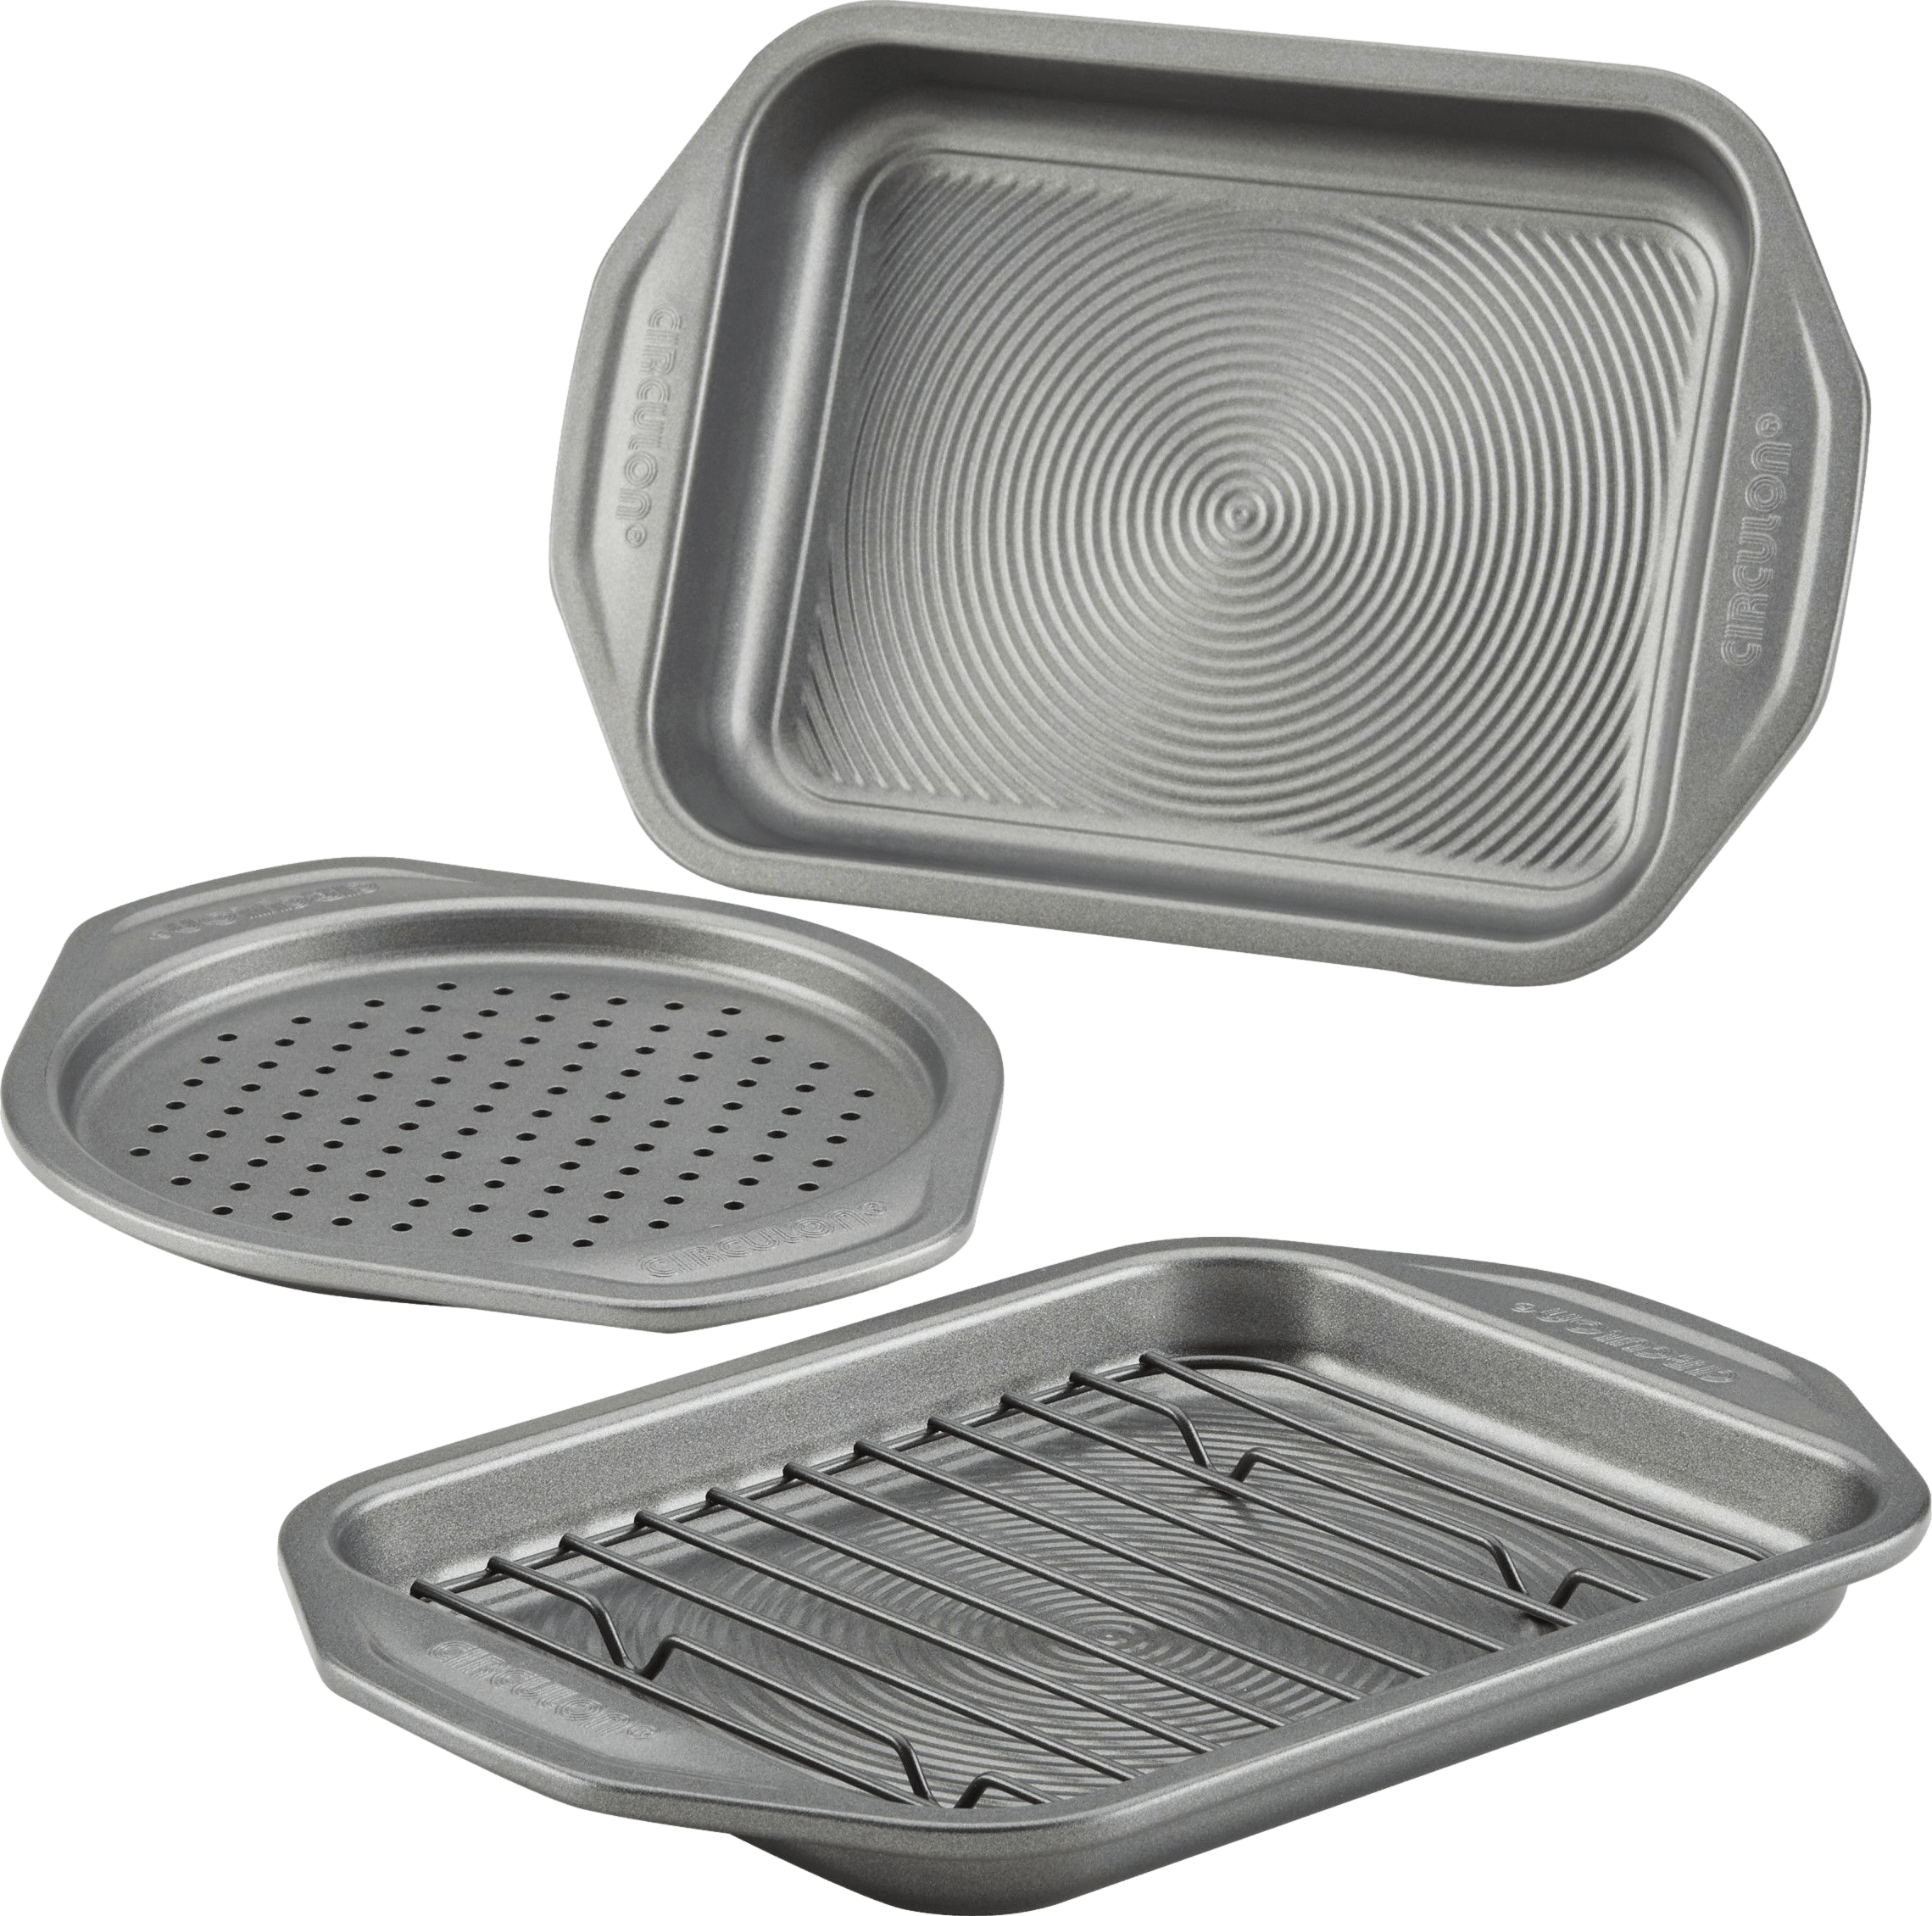 Stainless Steel Pizza Pan for Grill or Oven